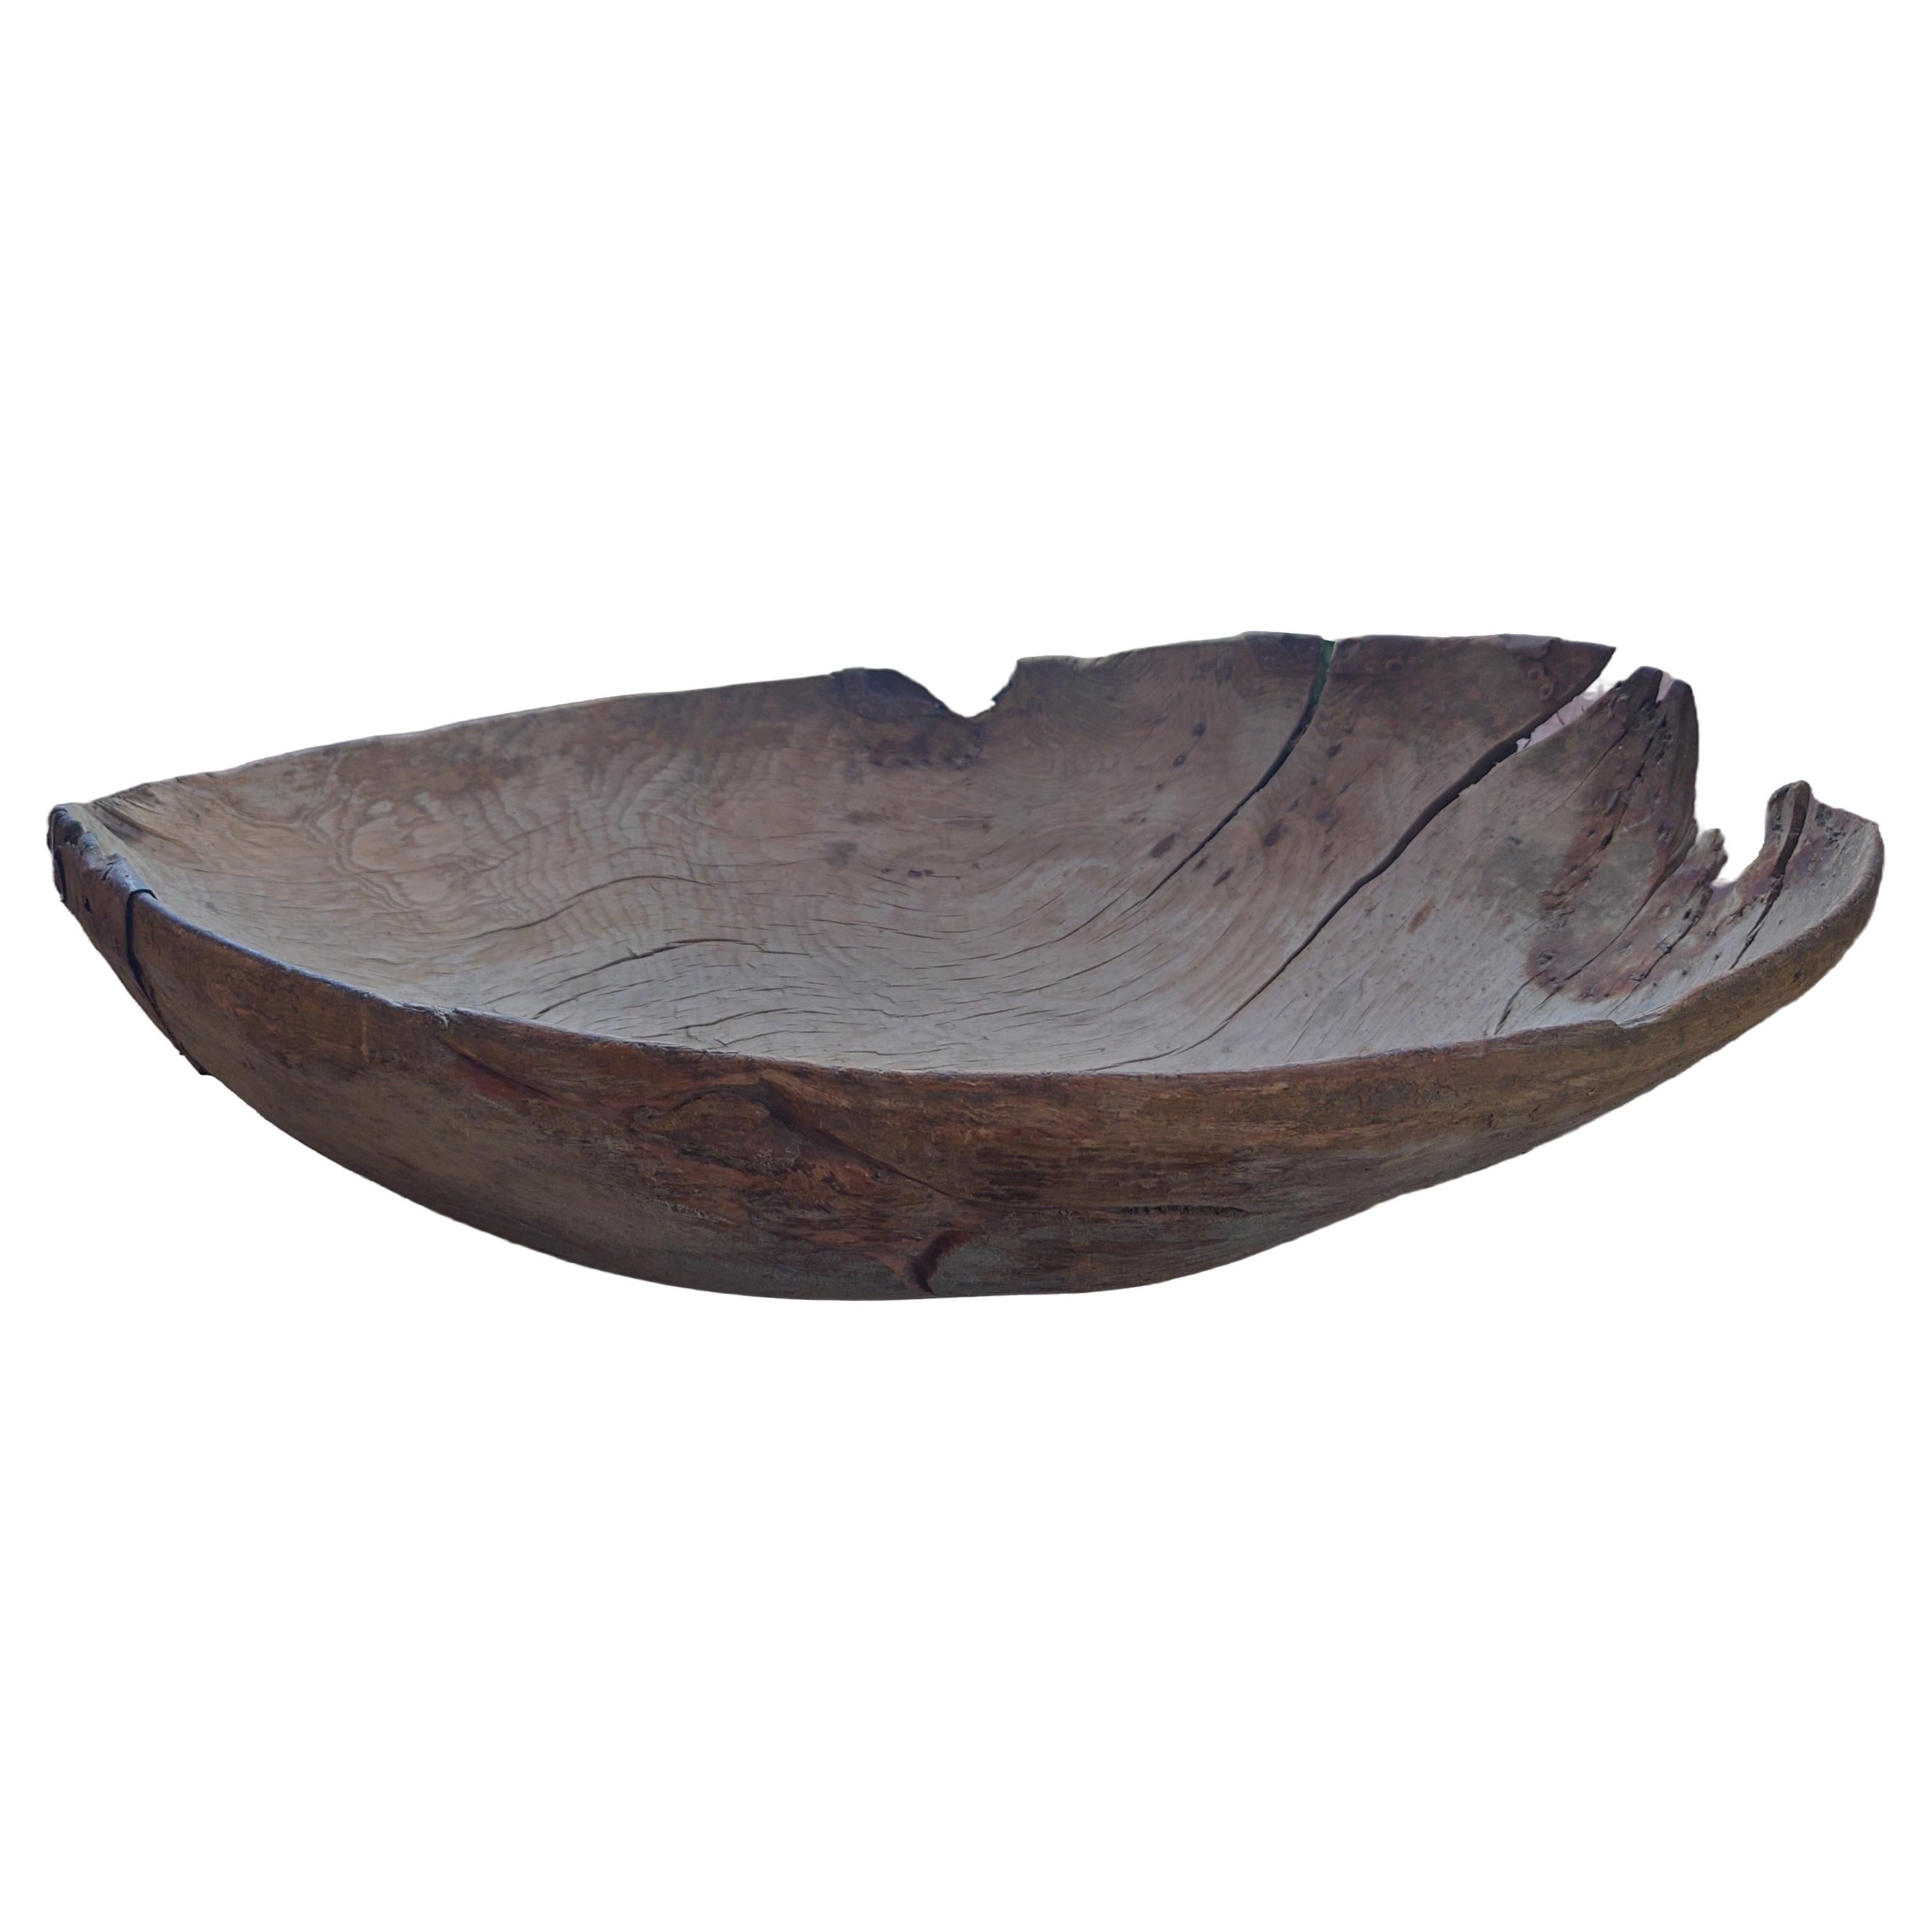 An exceptional large rare oval shaped 18th century primitive Swedish carved wooden knot bowl. Shows a dry textured finish showing a stunning aged patina. A truly remarkable piece. The bowl has a beautiful pearl gray original Color
Old cracks &